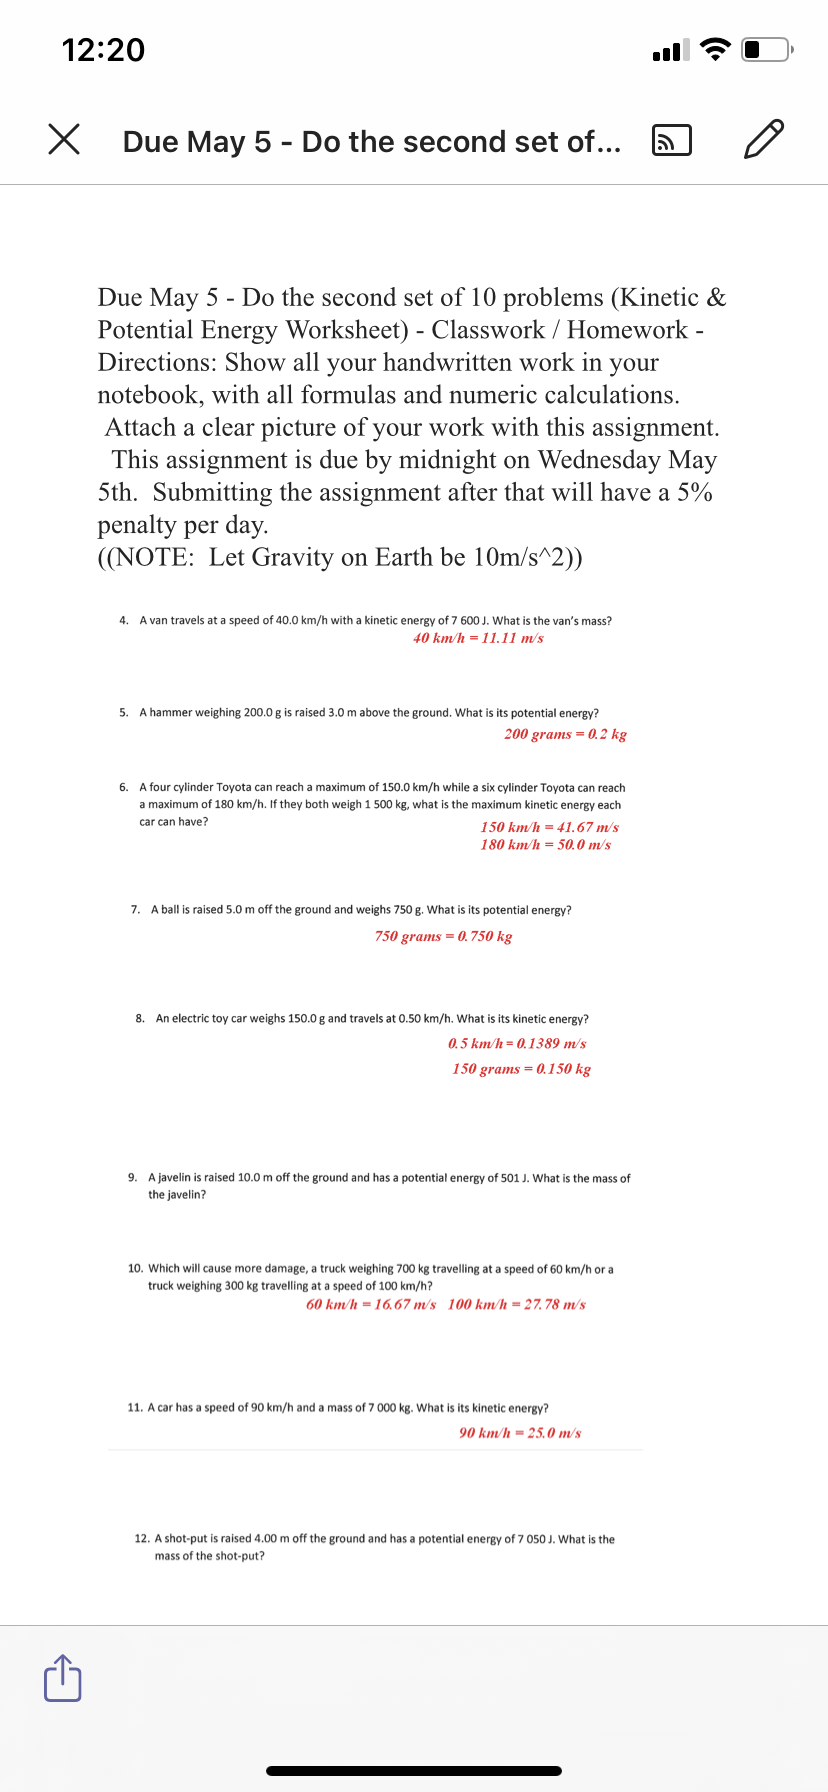 12:20
Due May 5 - Do the second set of...
Due May 5 - Do the second set of 10 problems (Kinetic &
Potential Energy Worksheet) - Classwork / Homework -
Directions: Show all your handwritten work in your
notebook, with all formulas and numeric calculations.
Attach a clear picture of your work with this assignment.
This assignment is due by midnight on Wednesday Ma
5th. Submitting the assignment after that will have a 5%
penalty per day.
((NOTE: Let Gravity on Earth be 10m/s^2))
4.
A van travels at a speed of 40.0 km/h with a kinetic energy of 7 600 J. What is the van's mass?
40 km/h = 11.11 m/s
5. A hammer weighing 200.0 g is raised 3.0 m above the ground. What is its potential energy?
200 grams = 0.2 kg
6. A four cylinder Toyota can reach a maximum of 150.0 km/h while a six cylinder Toyota can reach
a maximum of 180 km/h. If they both weigh 1 500 kg, what is the maximum kinetic energy each
car can have?
150 km/h = 41.67 m/s
180 km/h = 50.0 m/s
7. A ball is raised 5.0 m off the ground and weighs 750 g. What is its potential energy?
750 grams = 0.750 kg
8. An electric toy car weighs 150.0 g and travels at 0.50 km/h. What is its kinetic energy?
0.5 km/h = 01389 m/s
150 grams = 0.150 kg
9. A javelin is raised 10.0 m off the ground and has a potential energy of 501 J. What is the mass of
the javelin?
10. Which will cause more damage, a truck weighing 700 kg travelling at a speed of 60 km/h or a
truck weighing 300 kg travelling at a speed of 100 km/h?
60 km/h = 16.67 m/s 100 km/h = 27.78 m/'s
11. A car has a speed of 90 km/h and a mass of 7 000 kg. What is its kinetic energy?
90 km/h = 25.0 m/s
12. A shot-put is raised 4.00 m off the ground and has a potential energy of 7 050 J. What is the
mass of the shot-put?
